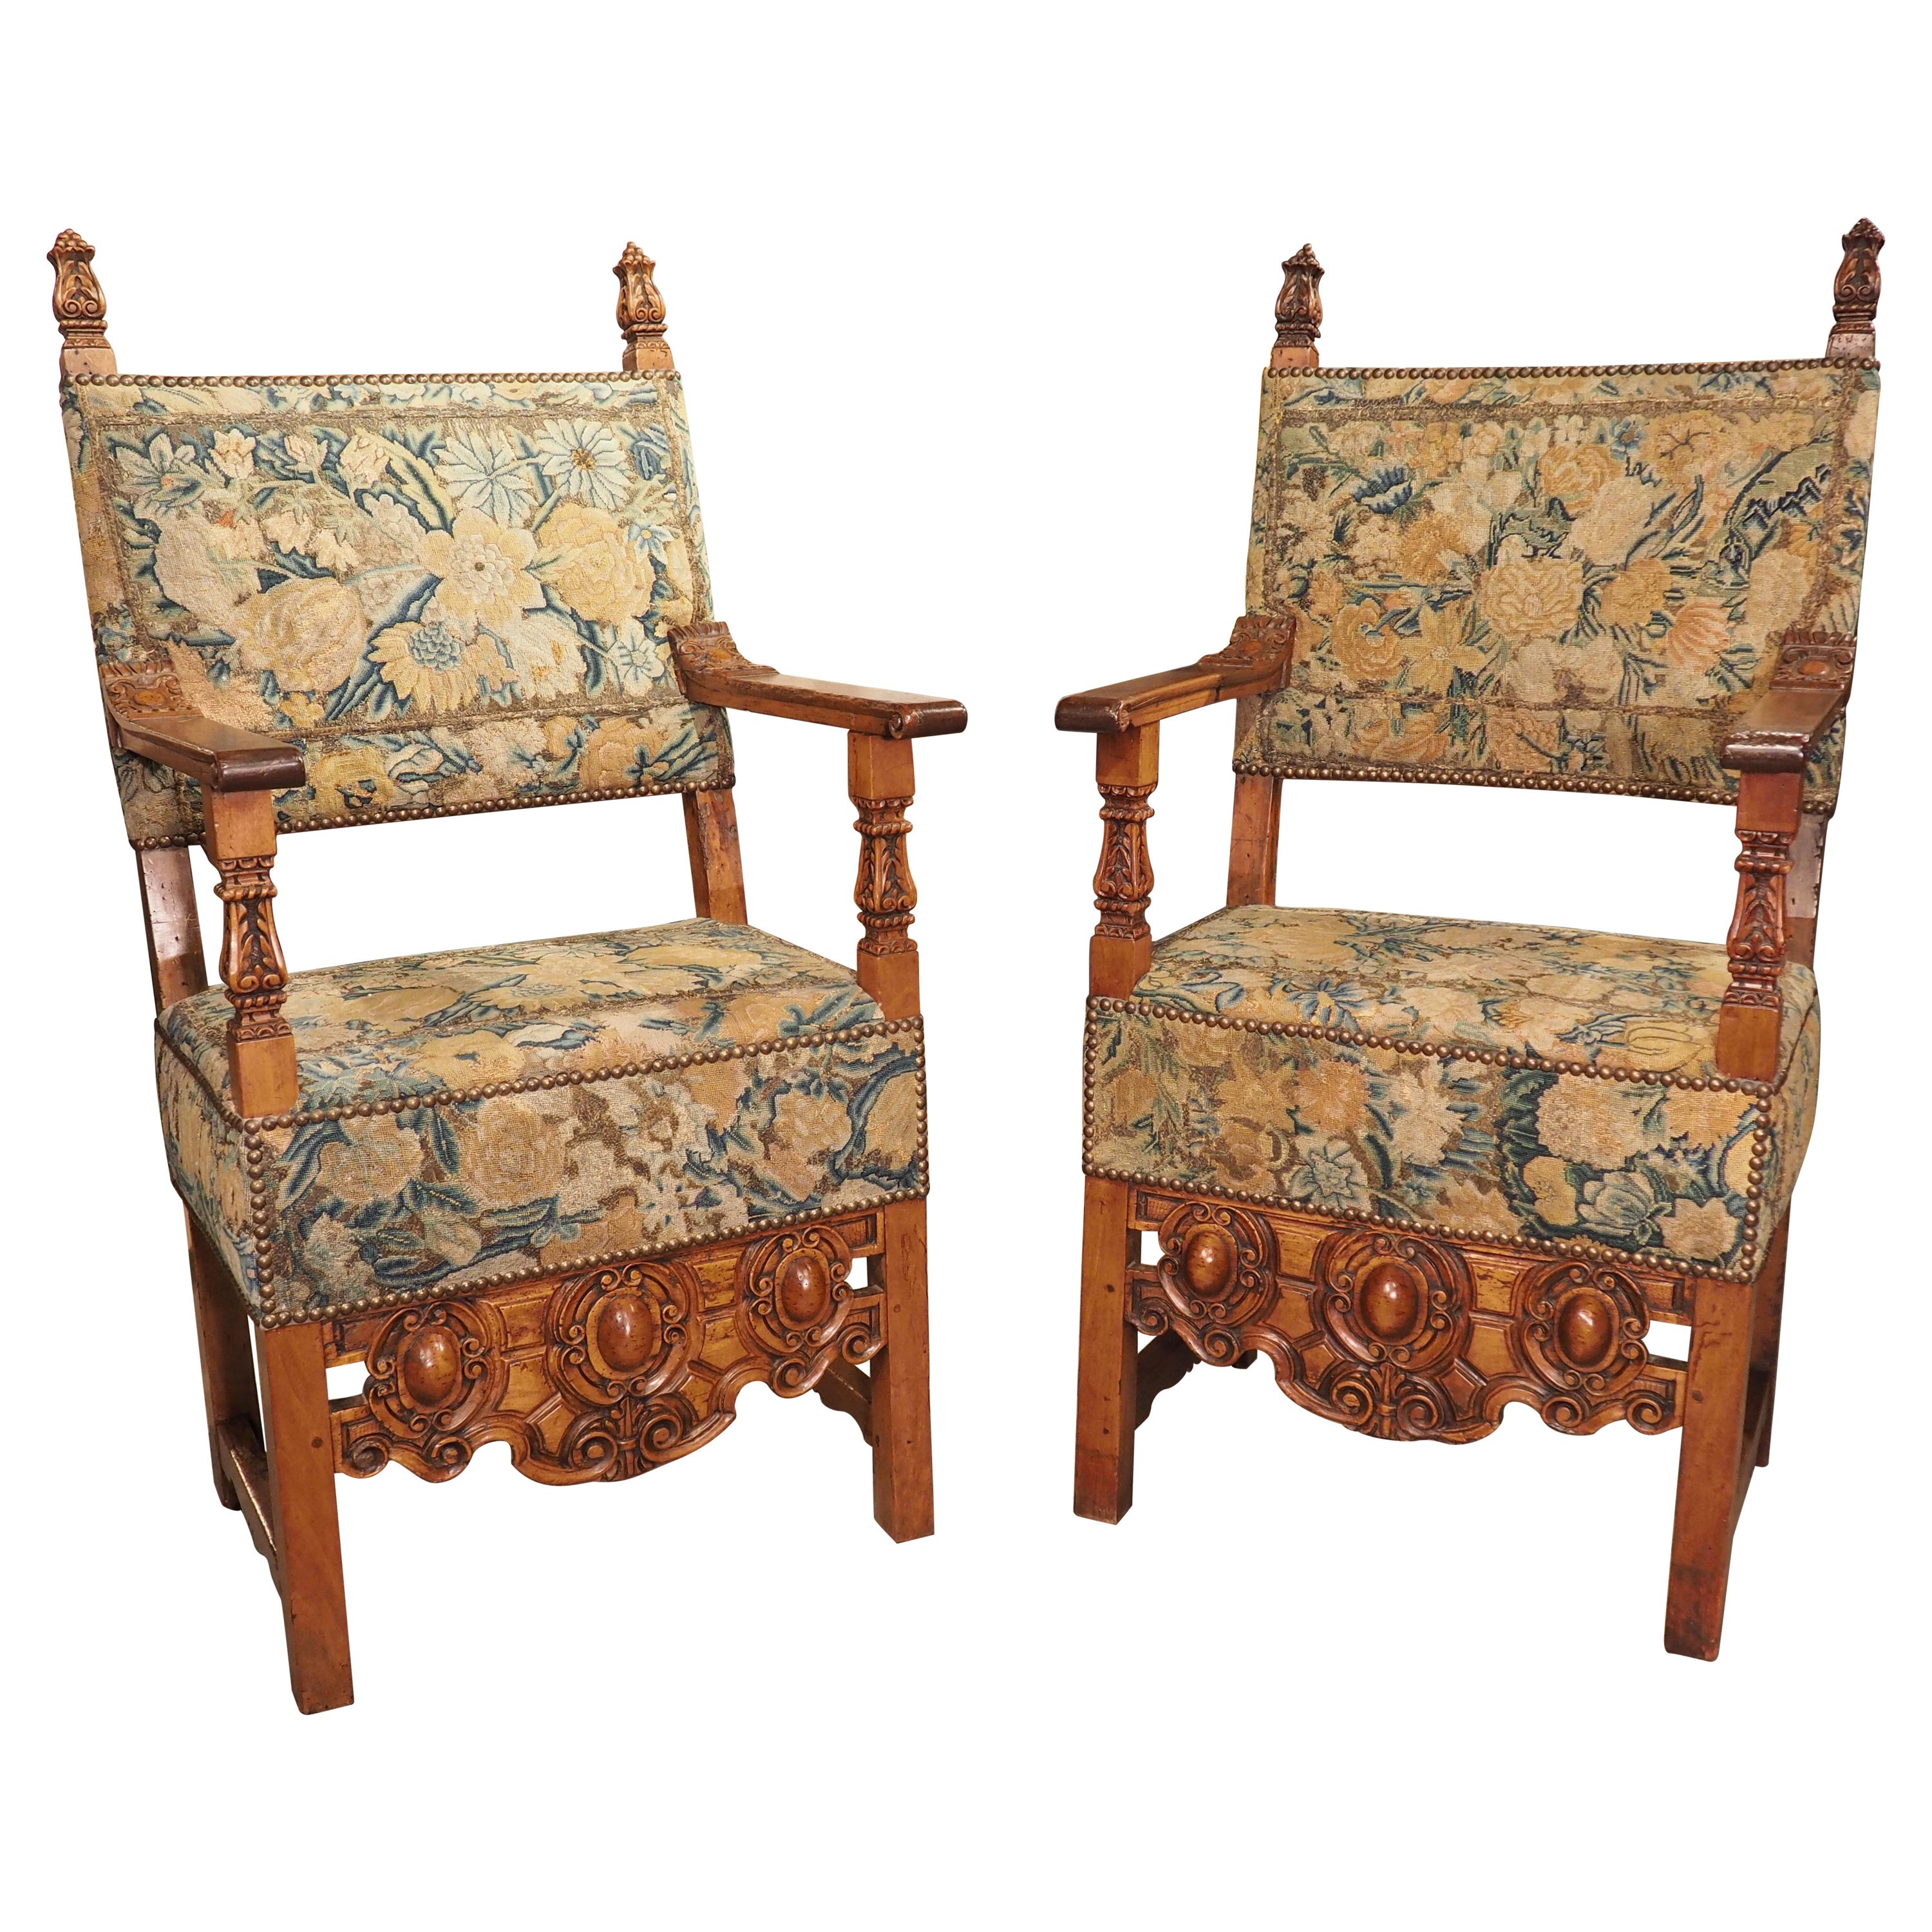 Pair of Antique Italian Carved Walnut Armchairs with Needlepoint Upholstery For Sale